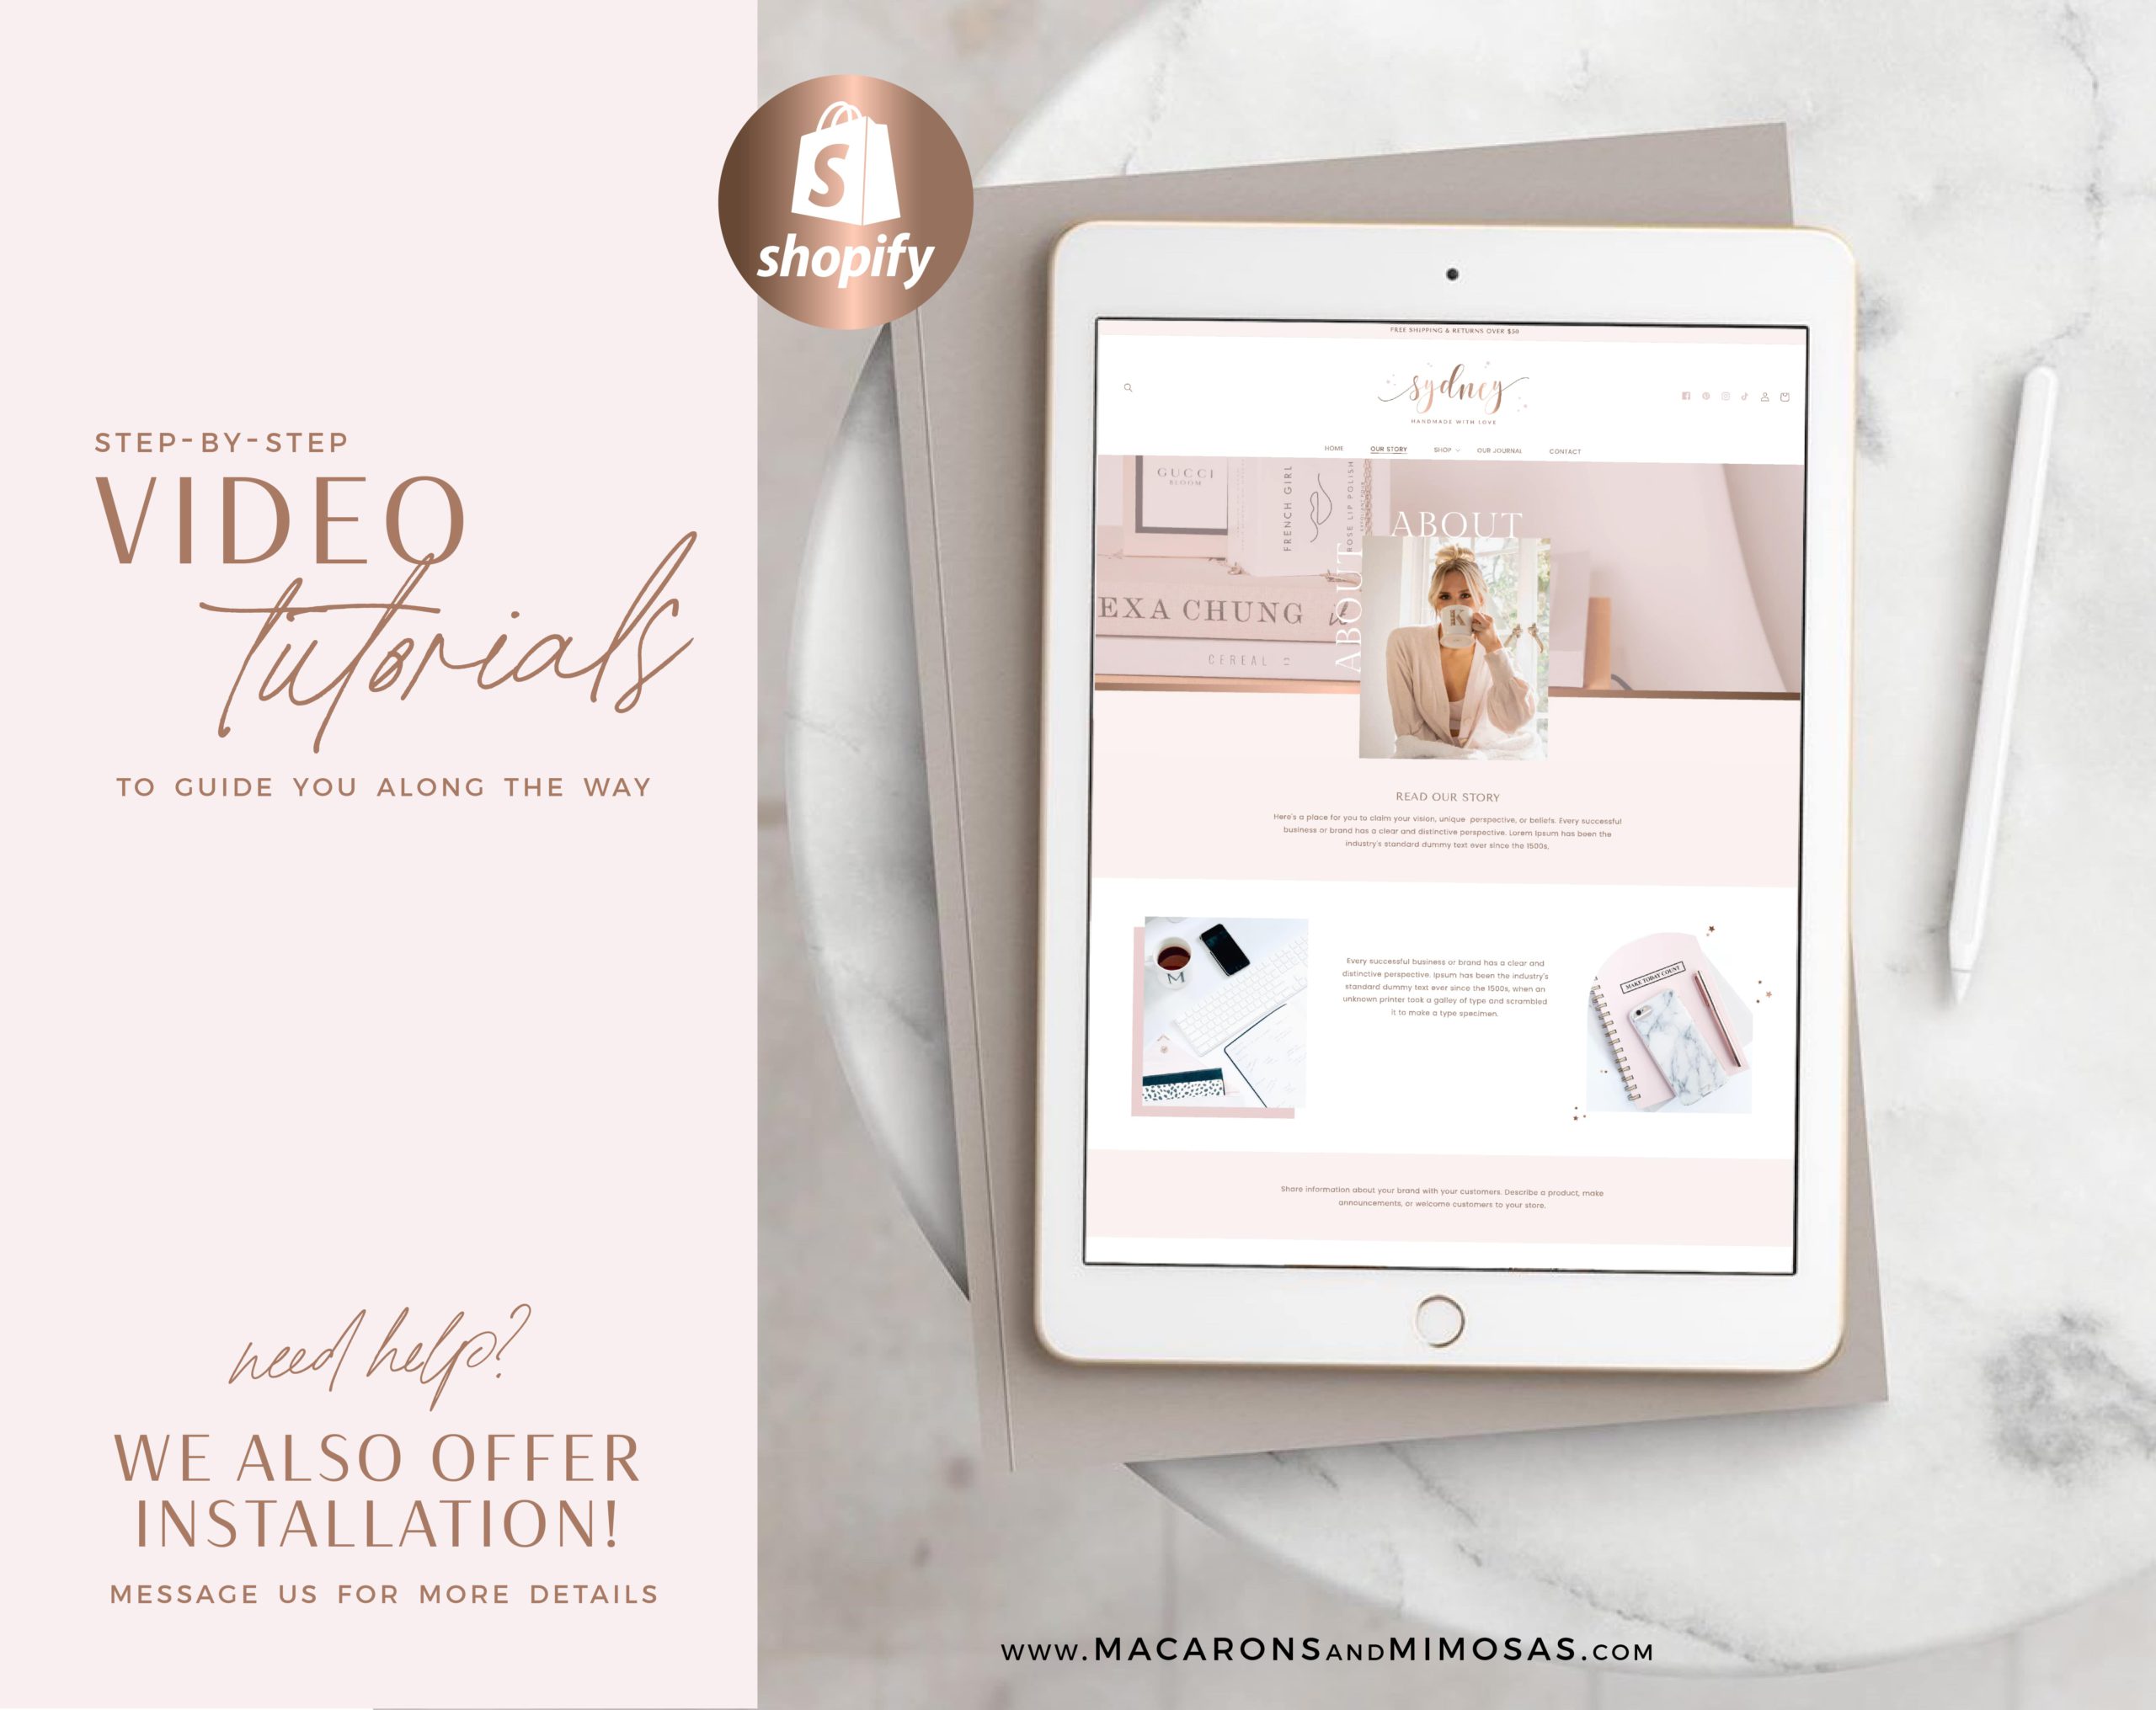 Rose Gold Shopify Theme Template, Pink Shopify Theme, Website Design Shopify 0S 2.0 Drag and Drop with Canva Banners